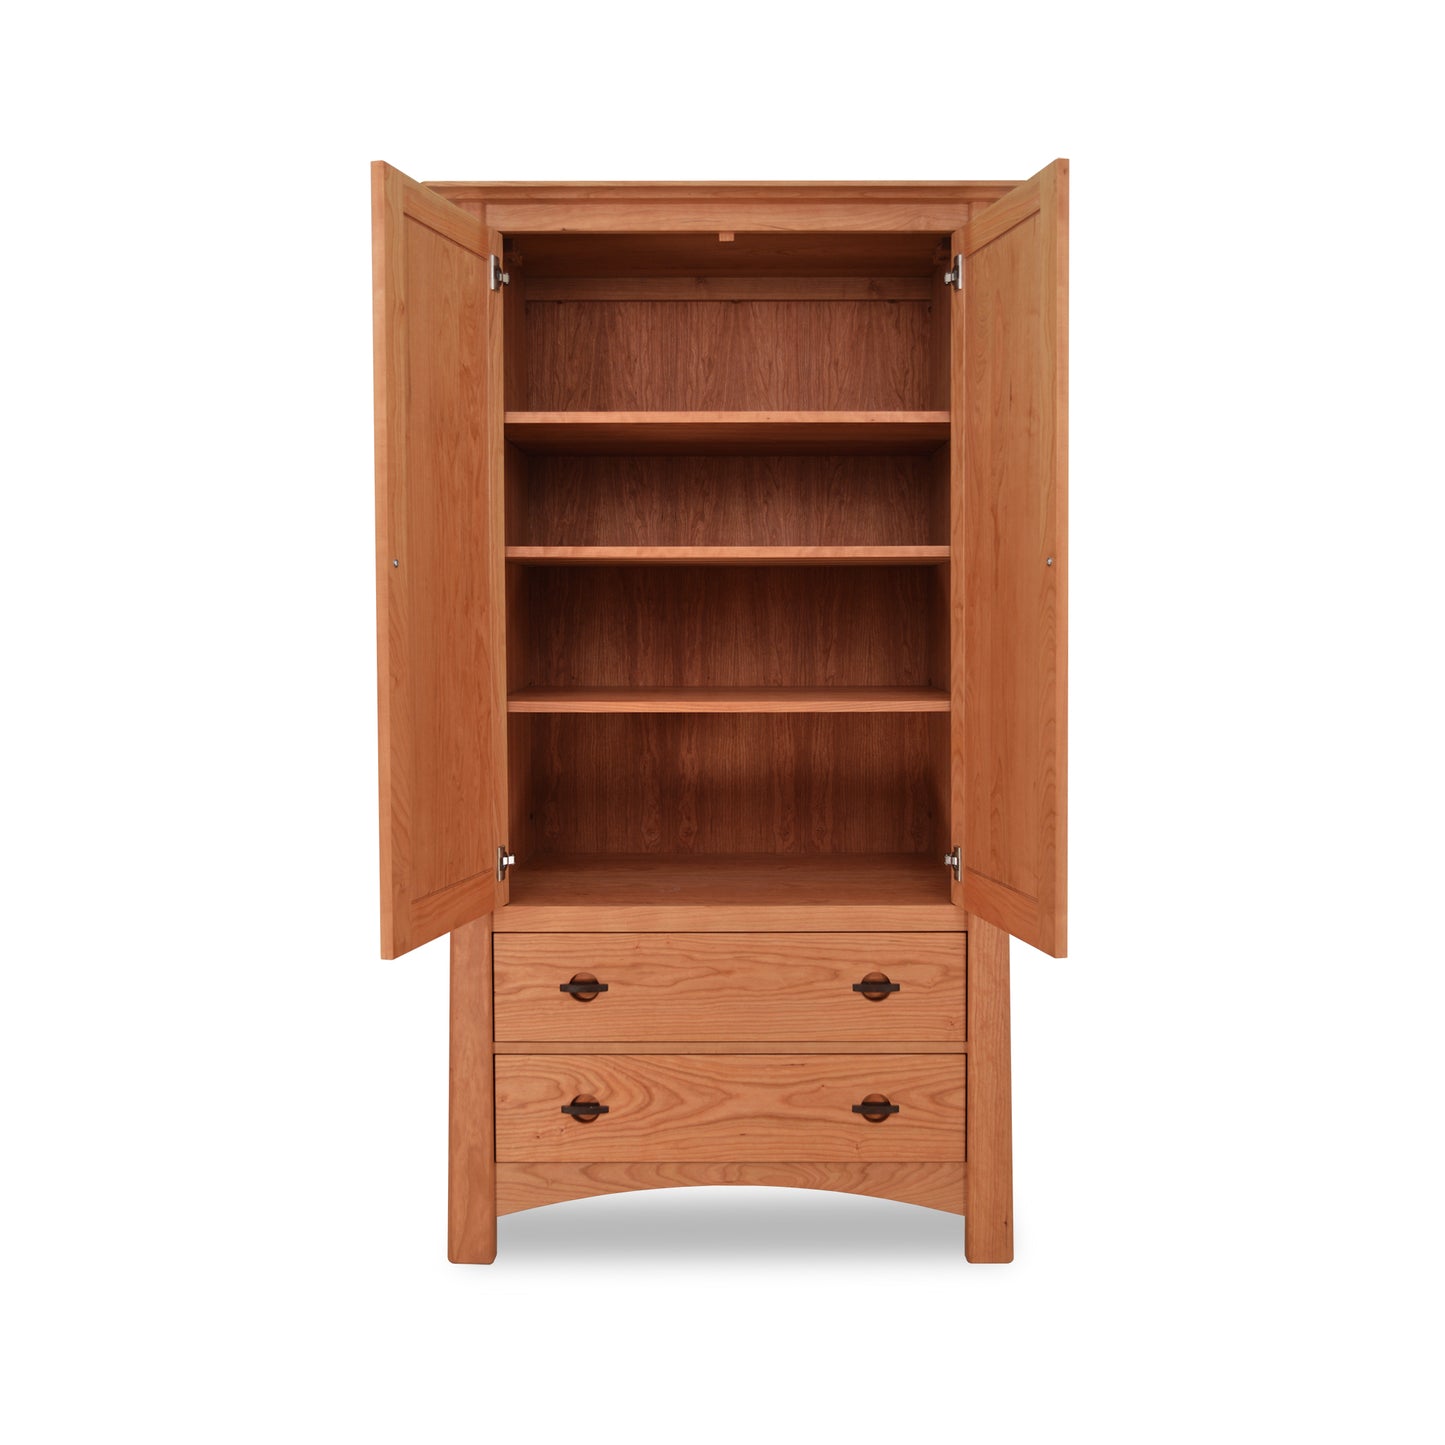 A handcrafted Maple Corner Woodworks Cherry Moon Armoire, featuring two drawers and an open door.